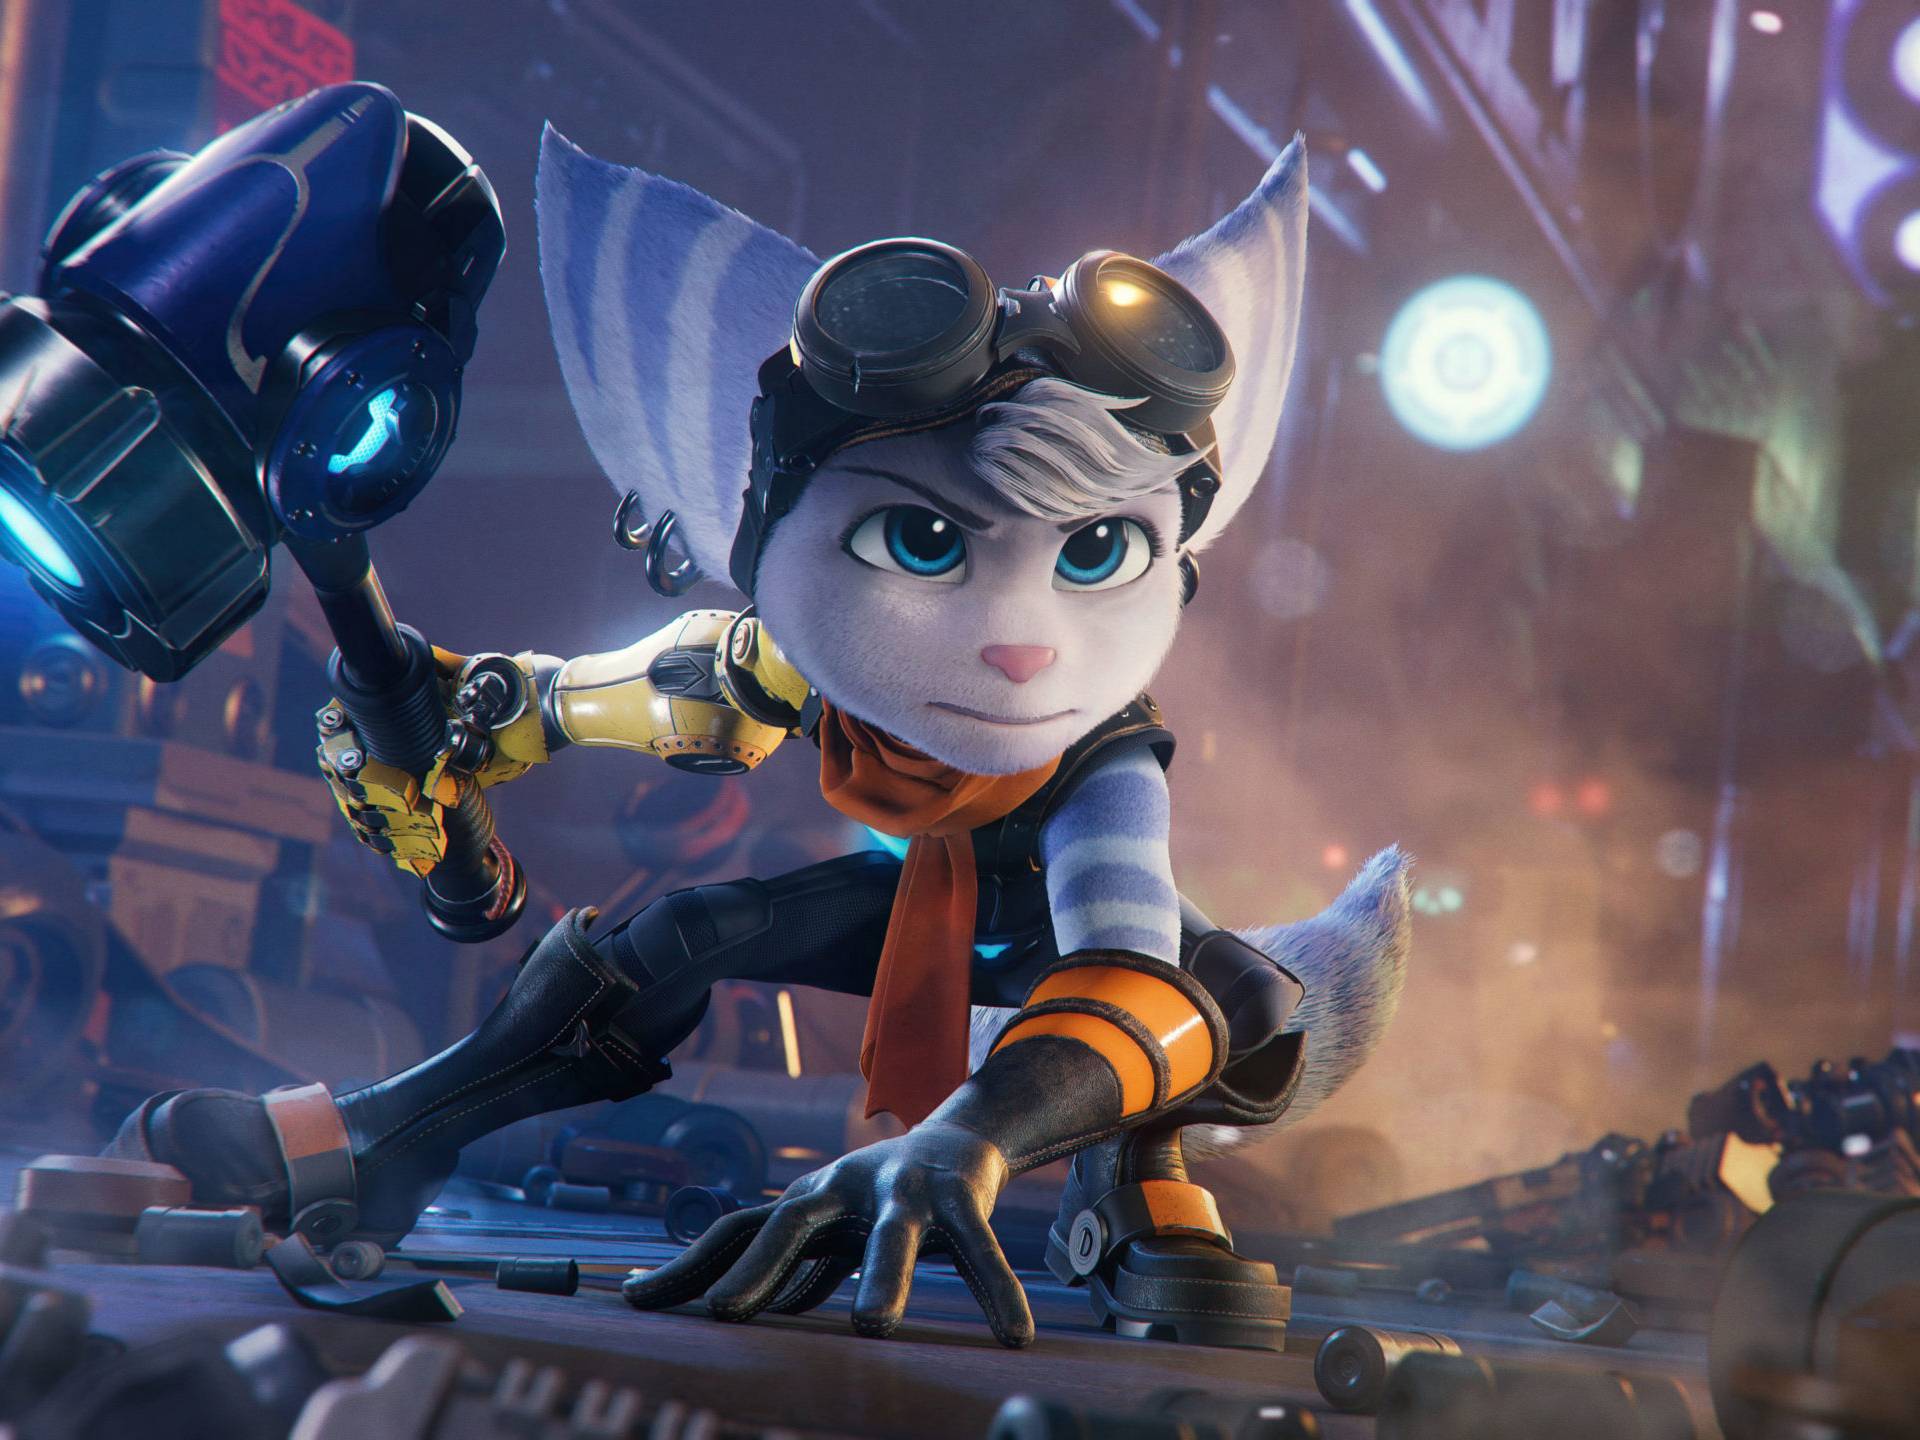 DF Weekly: why Ratchet and Clank is crucially important for the